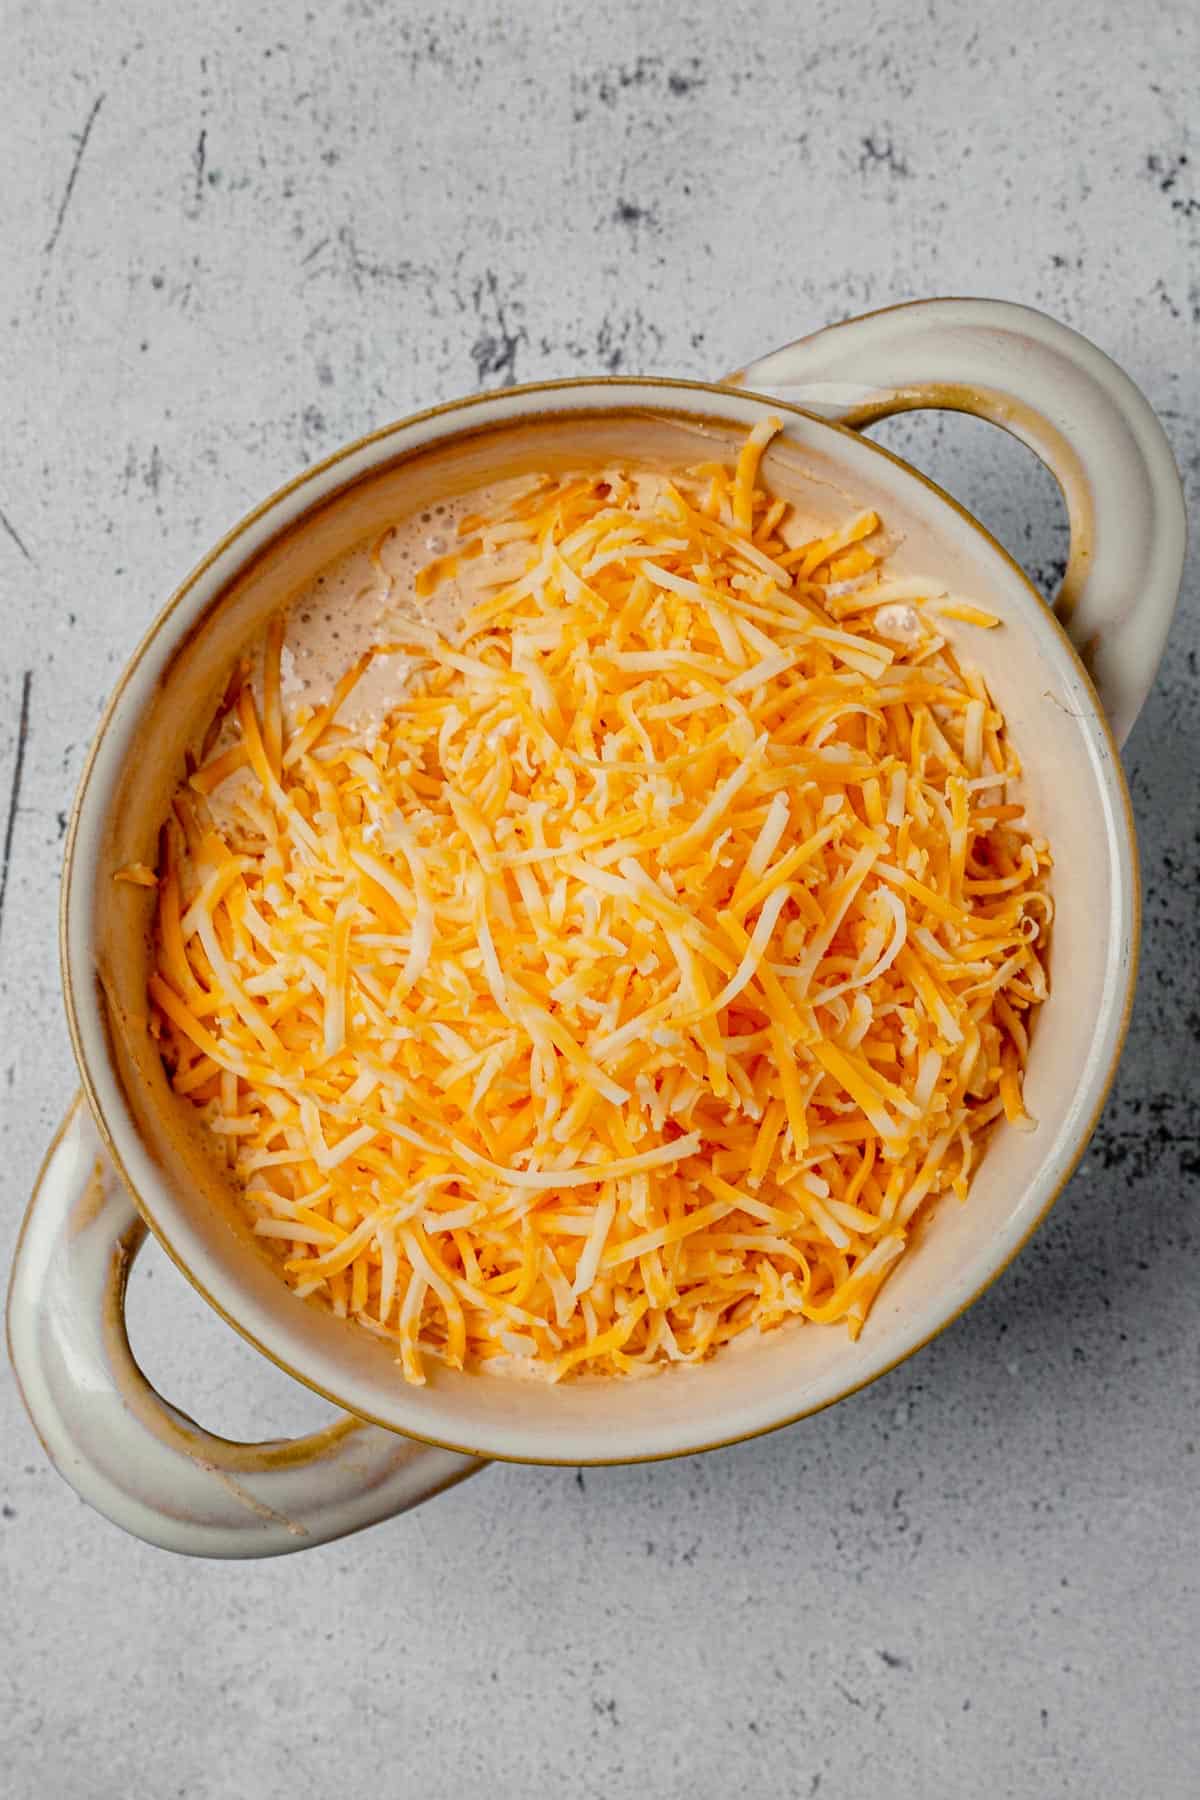 cottage cheese, taco seasoning, and shredded cheese in a bowl